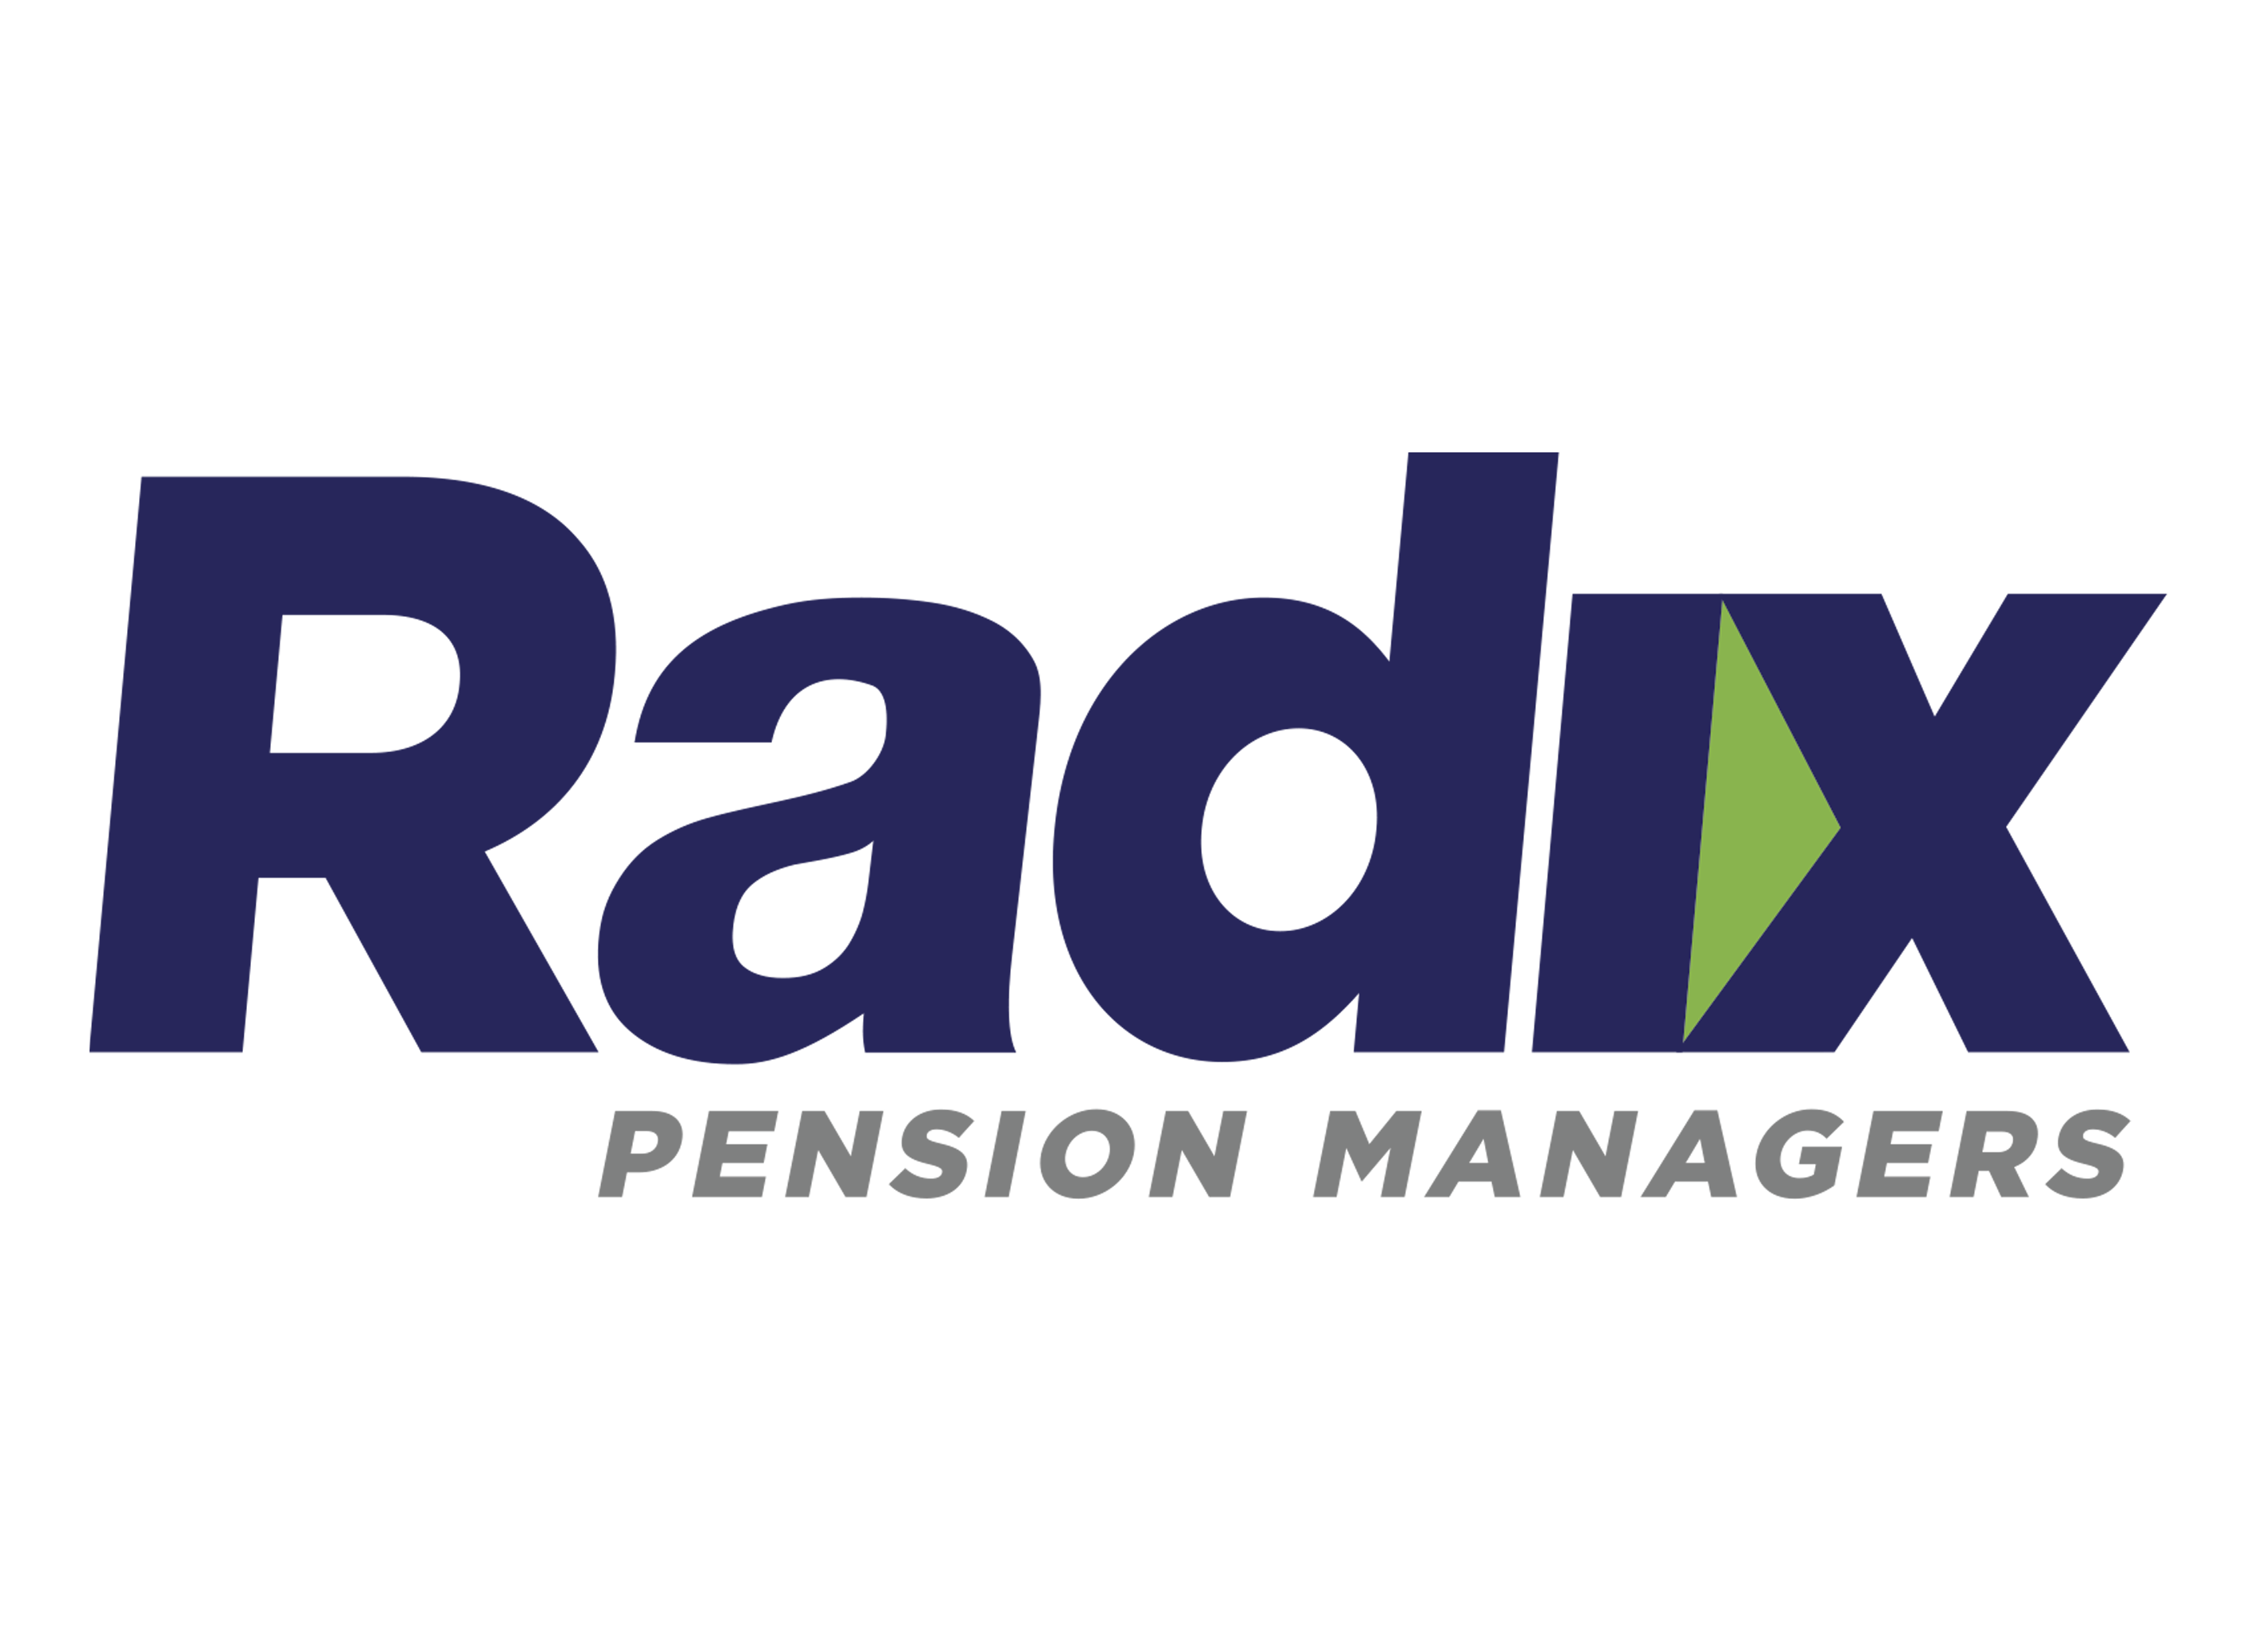 Radix Pension Managers